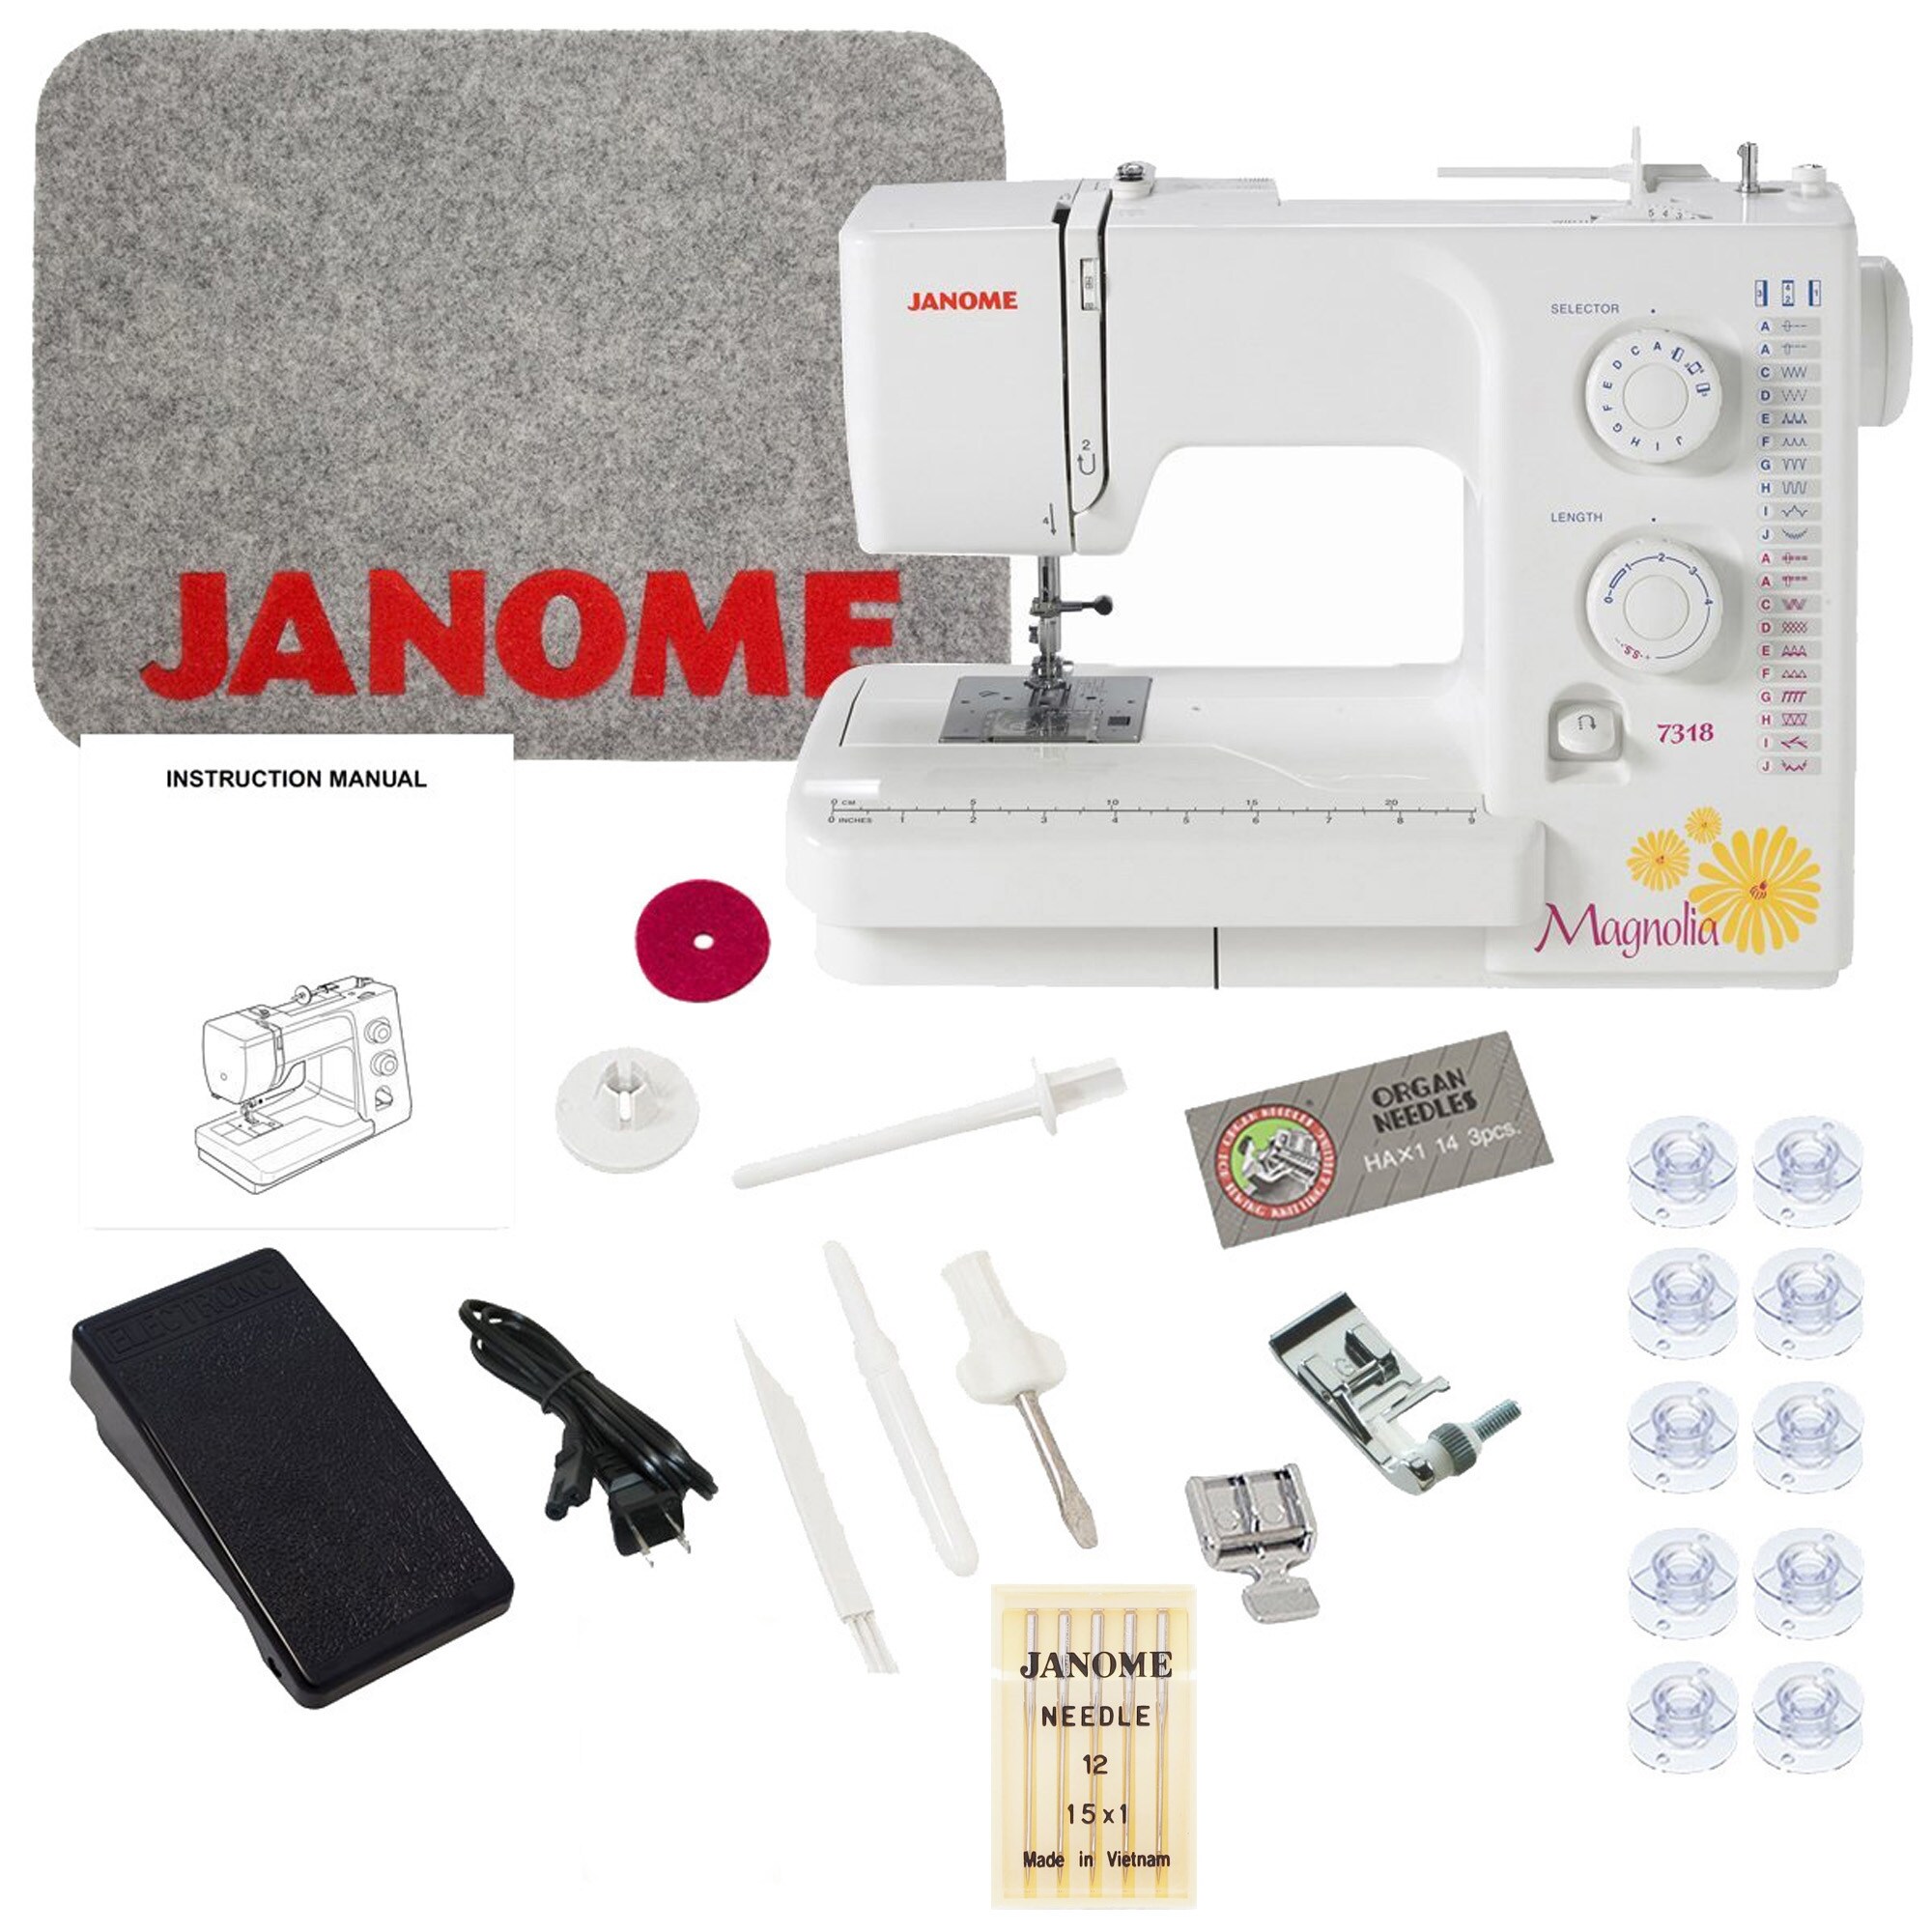 Sewing Machine for Beginners, 12 Built-in Stitches Portable Sew Machines  with Reverse Option for Clothing Repairs